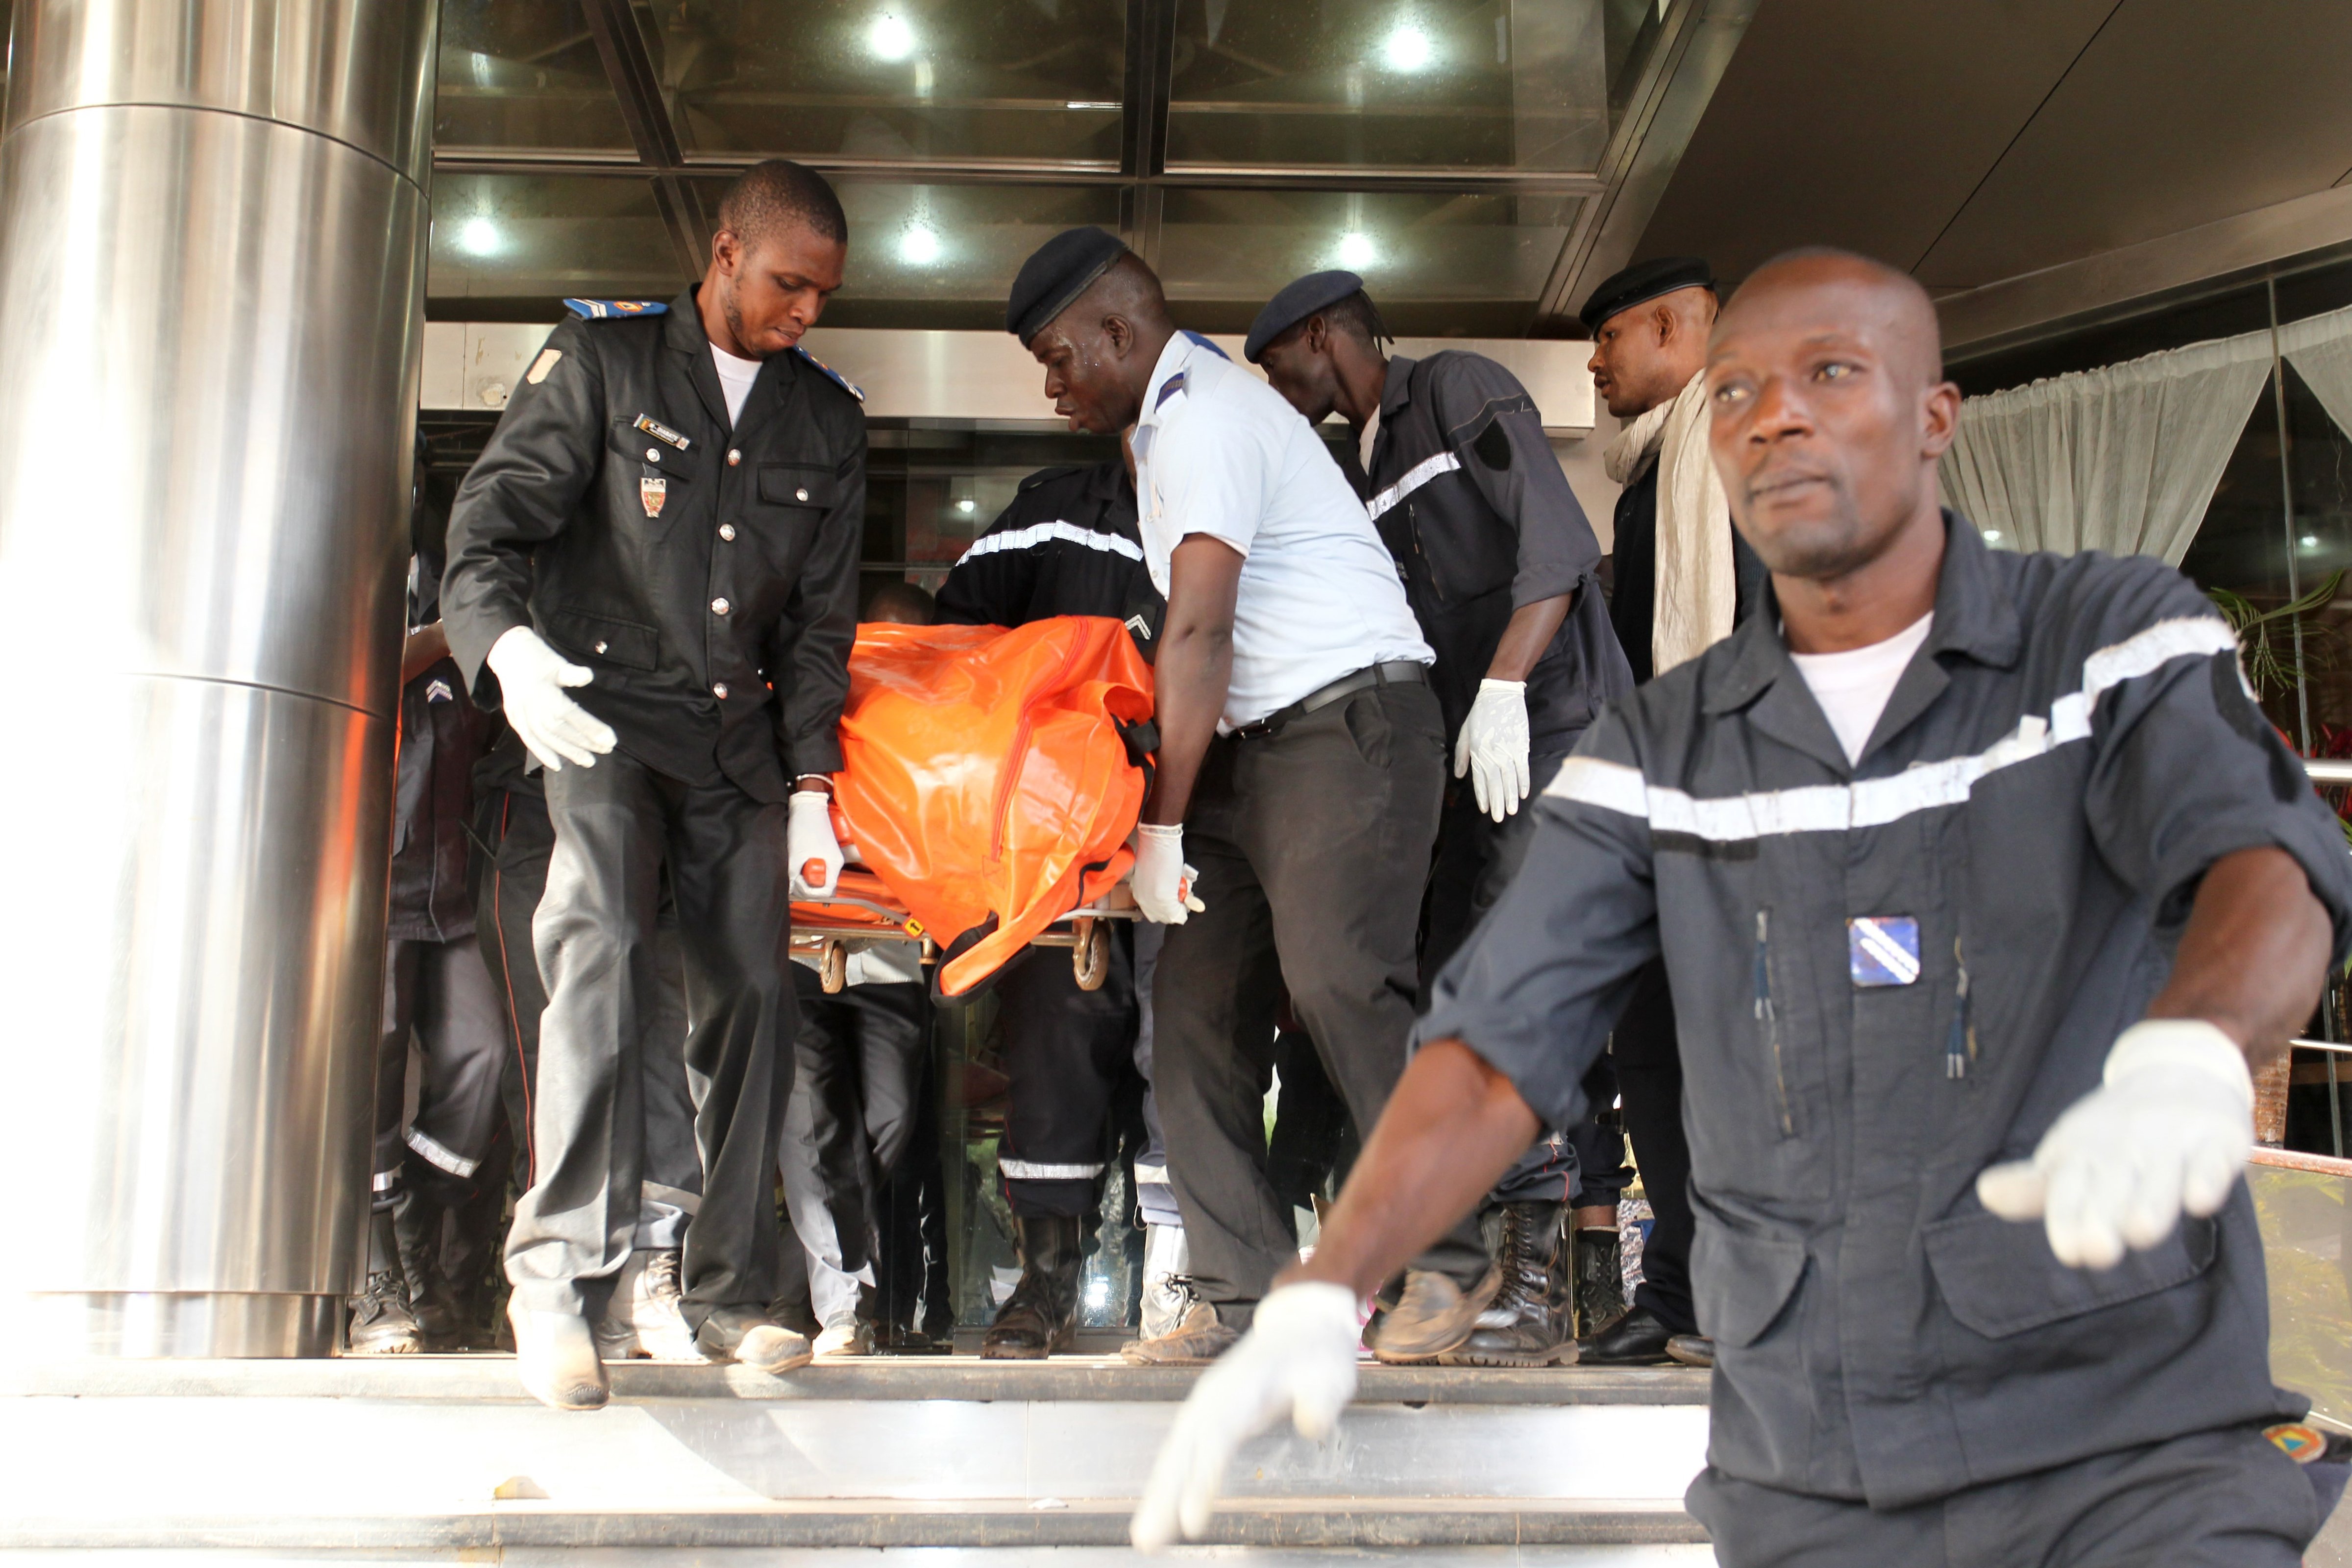 Officers evacuate bodies of victims from the Radisson Blu Hotel in Bamako, Mali,  on Nov. 20, 2015, where at least 19 people, including 3 Chinese executives, died (Habibou Kouyate—AFP/Getty Images)